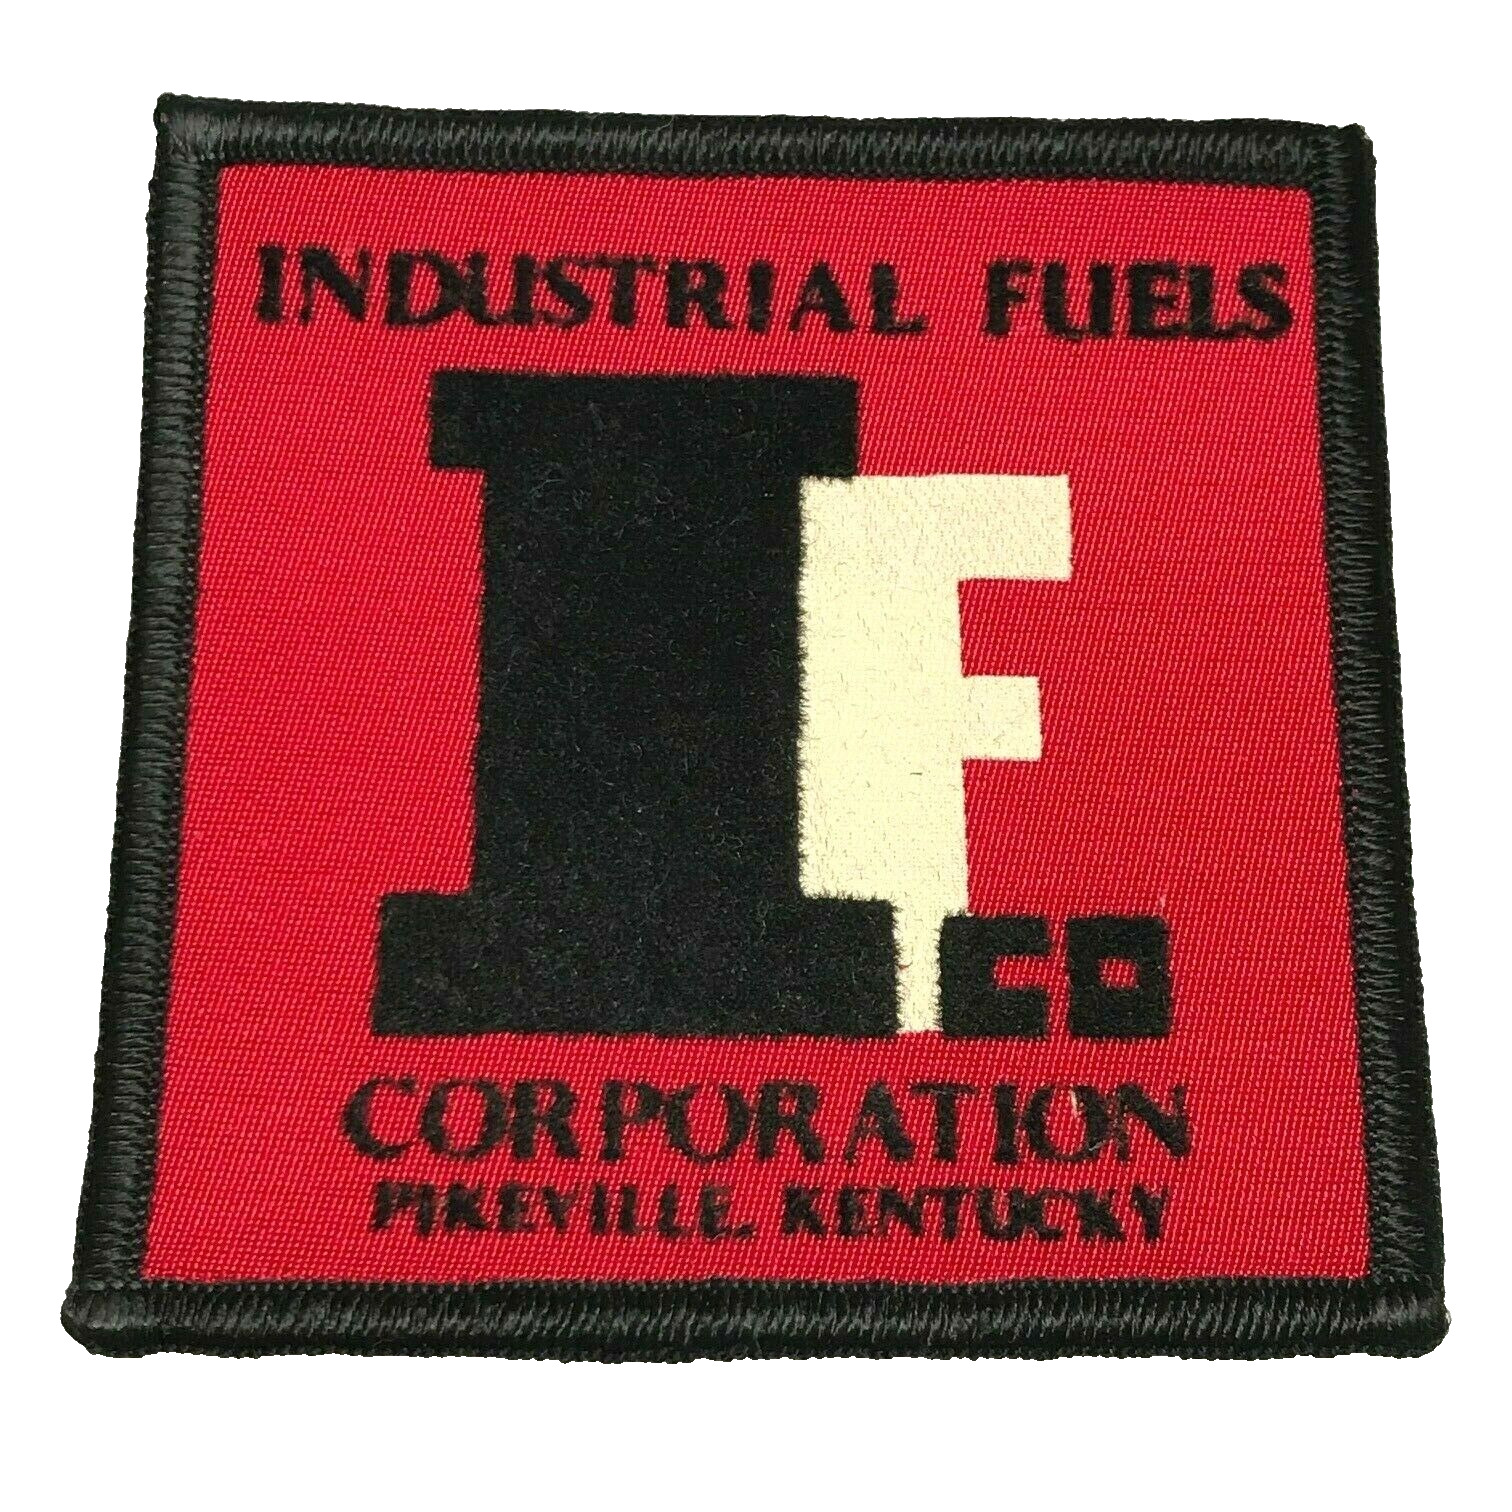 Vintage 70s 80s PIKEVILLE KY IFCO INDUSTRIAL FUELS Co Sew-on Patch Twill Felt